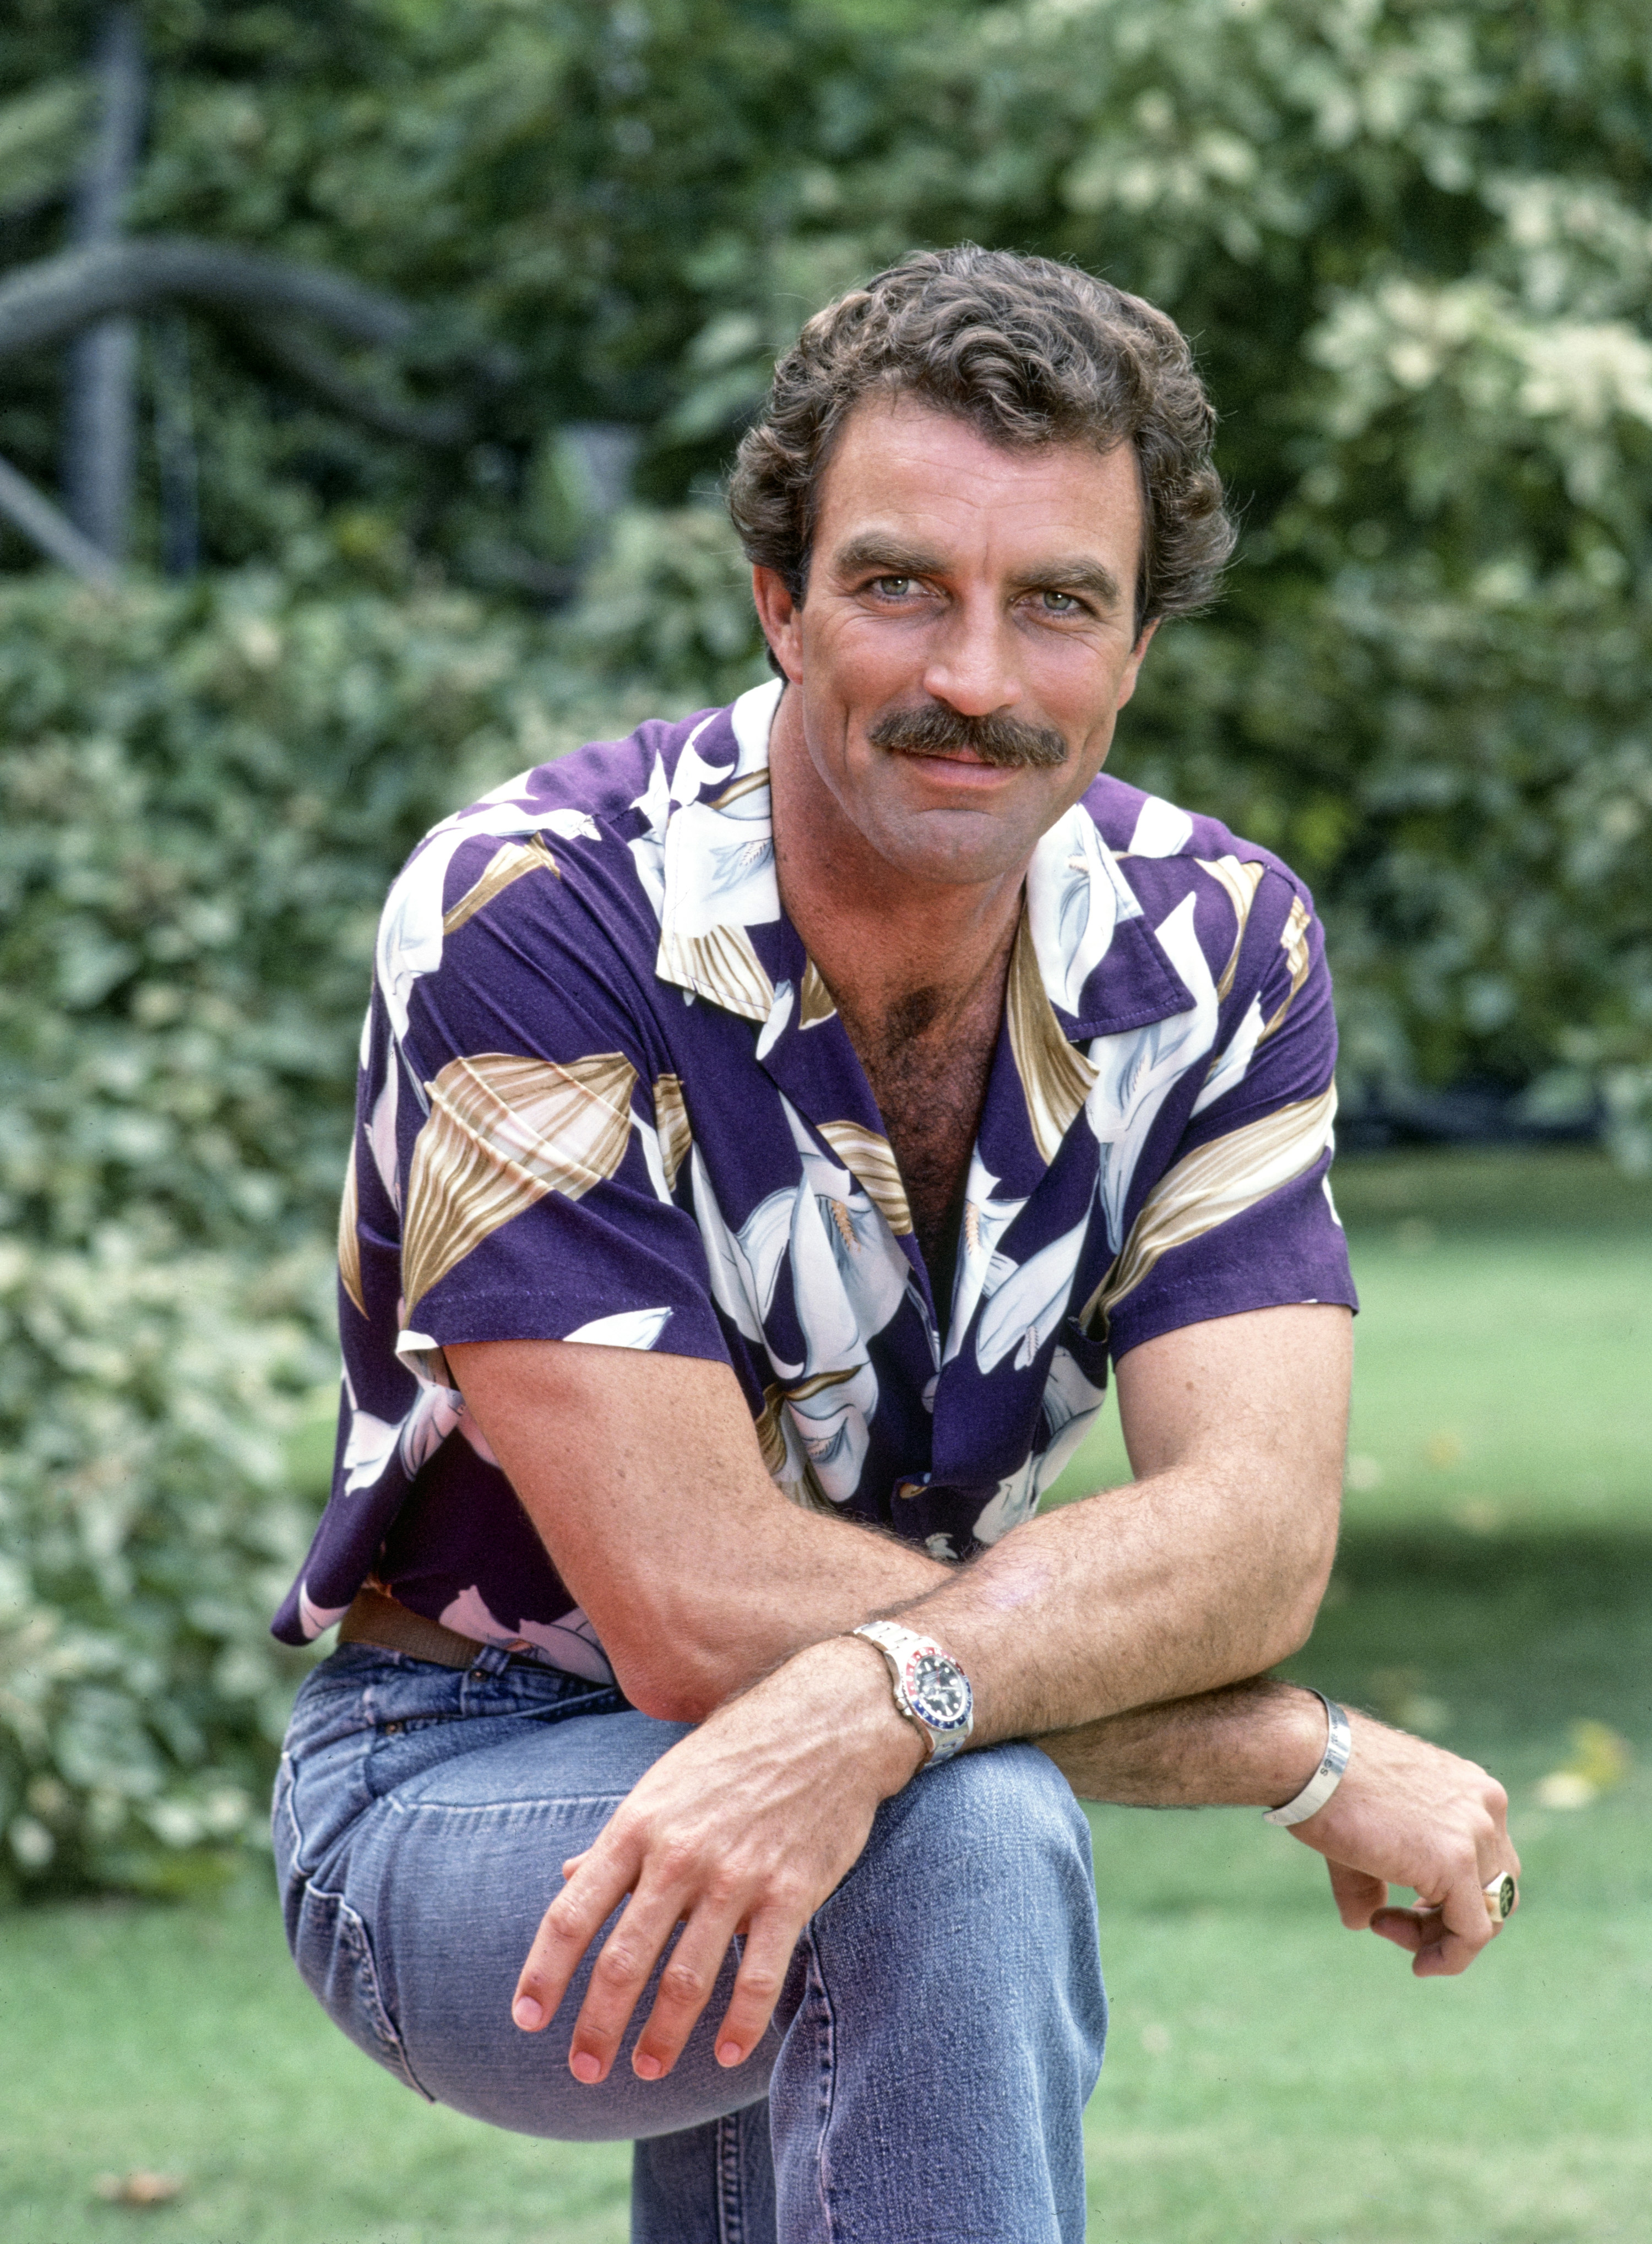 Pictured is Tom Selleck in the CBS television series